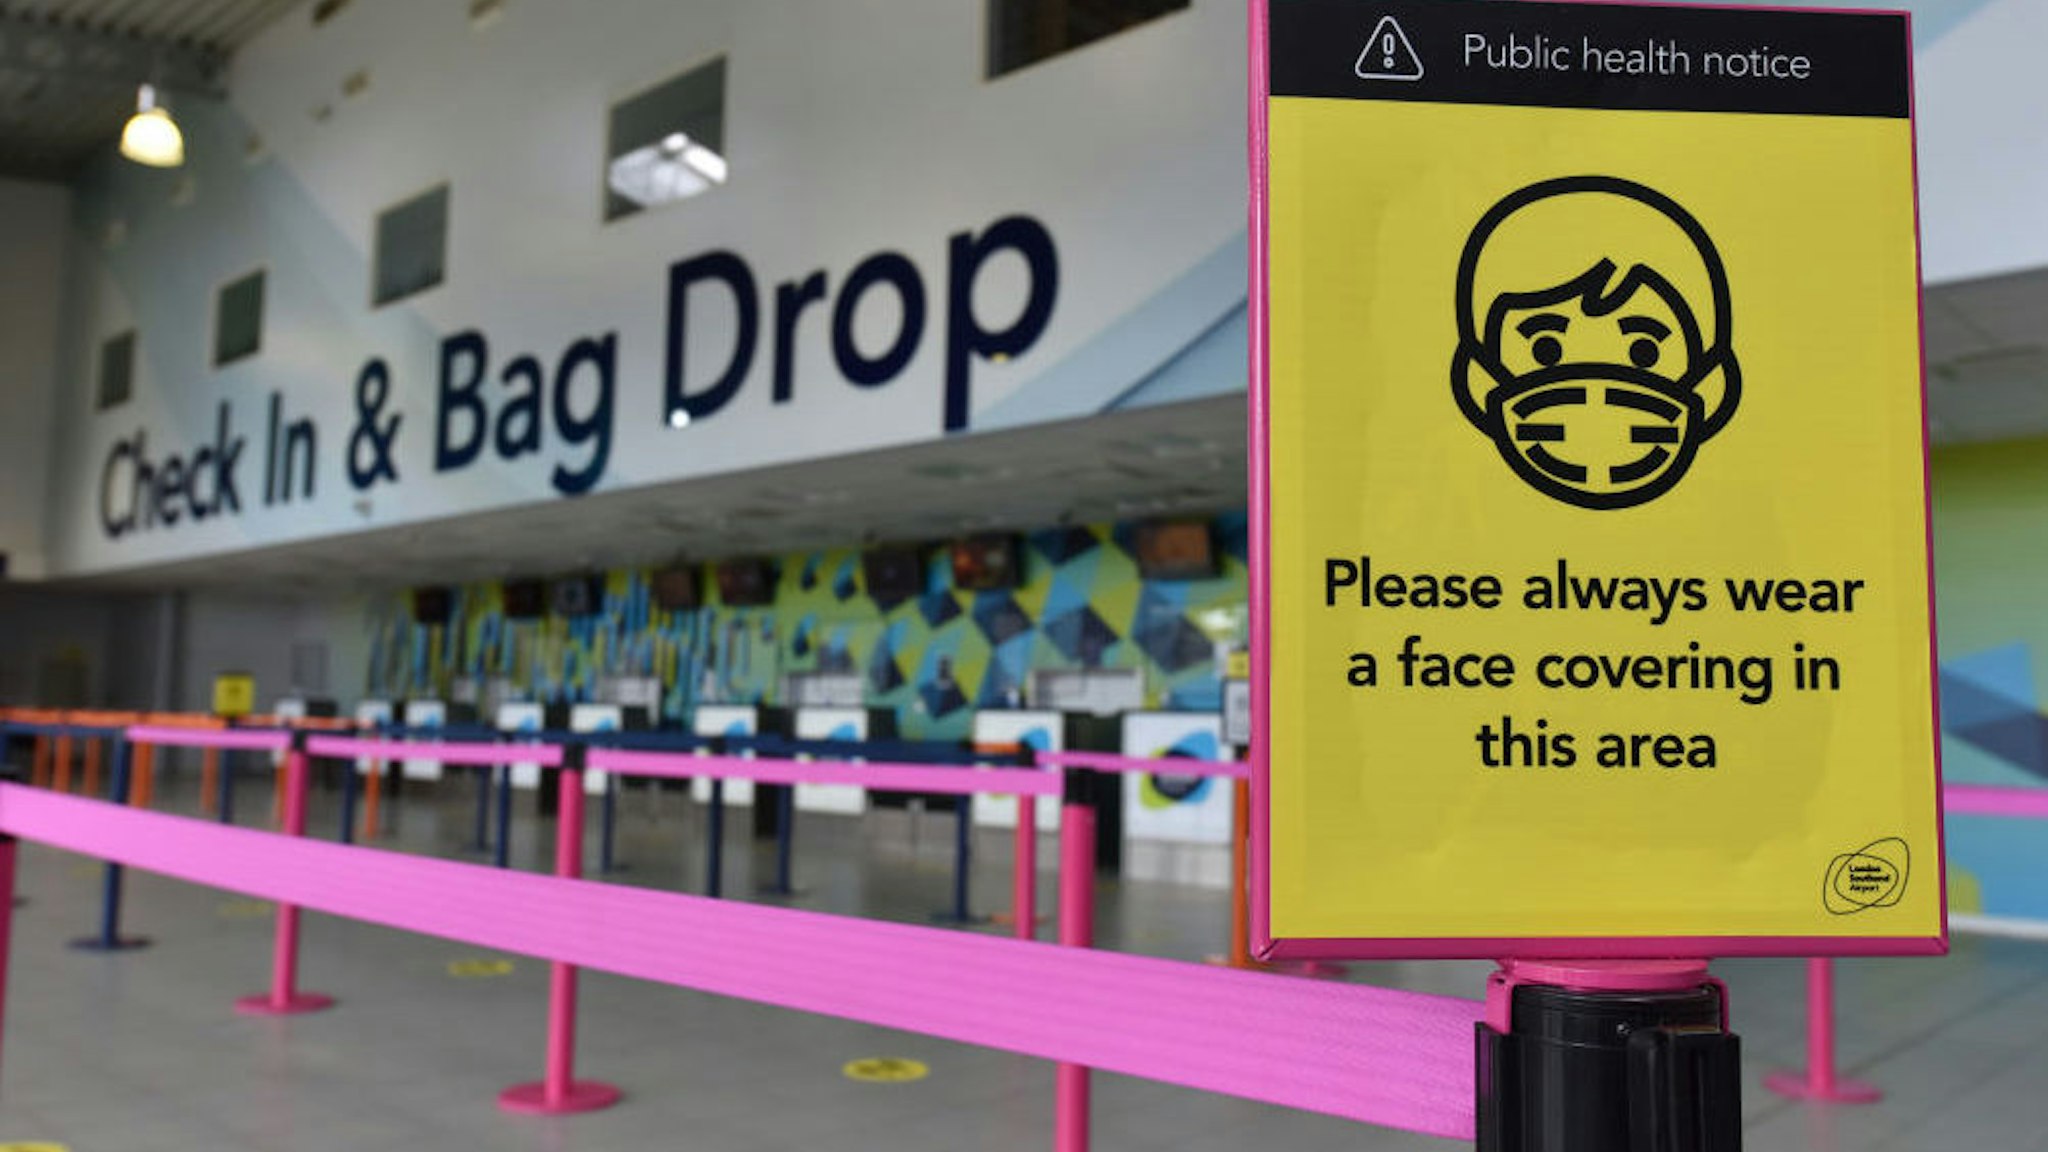 A general view of public health notice warning that face coverings should always be worn in the Check in and bag drop area as London Southend airport prepares for the reintroduction of passenger flights on June 18, 2020 in Southend-on-Sea, England.